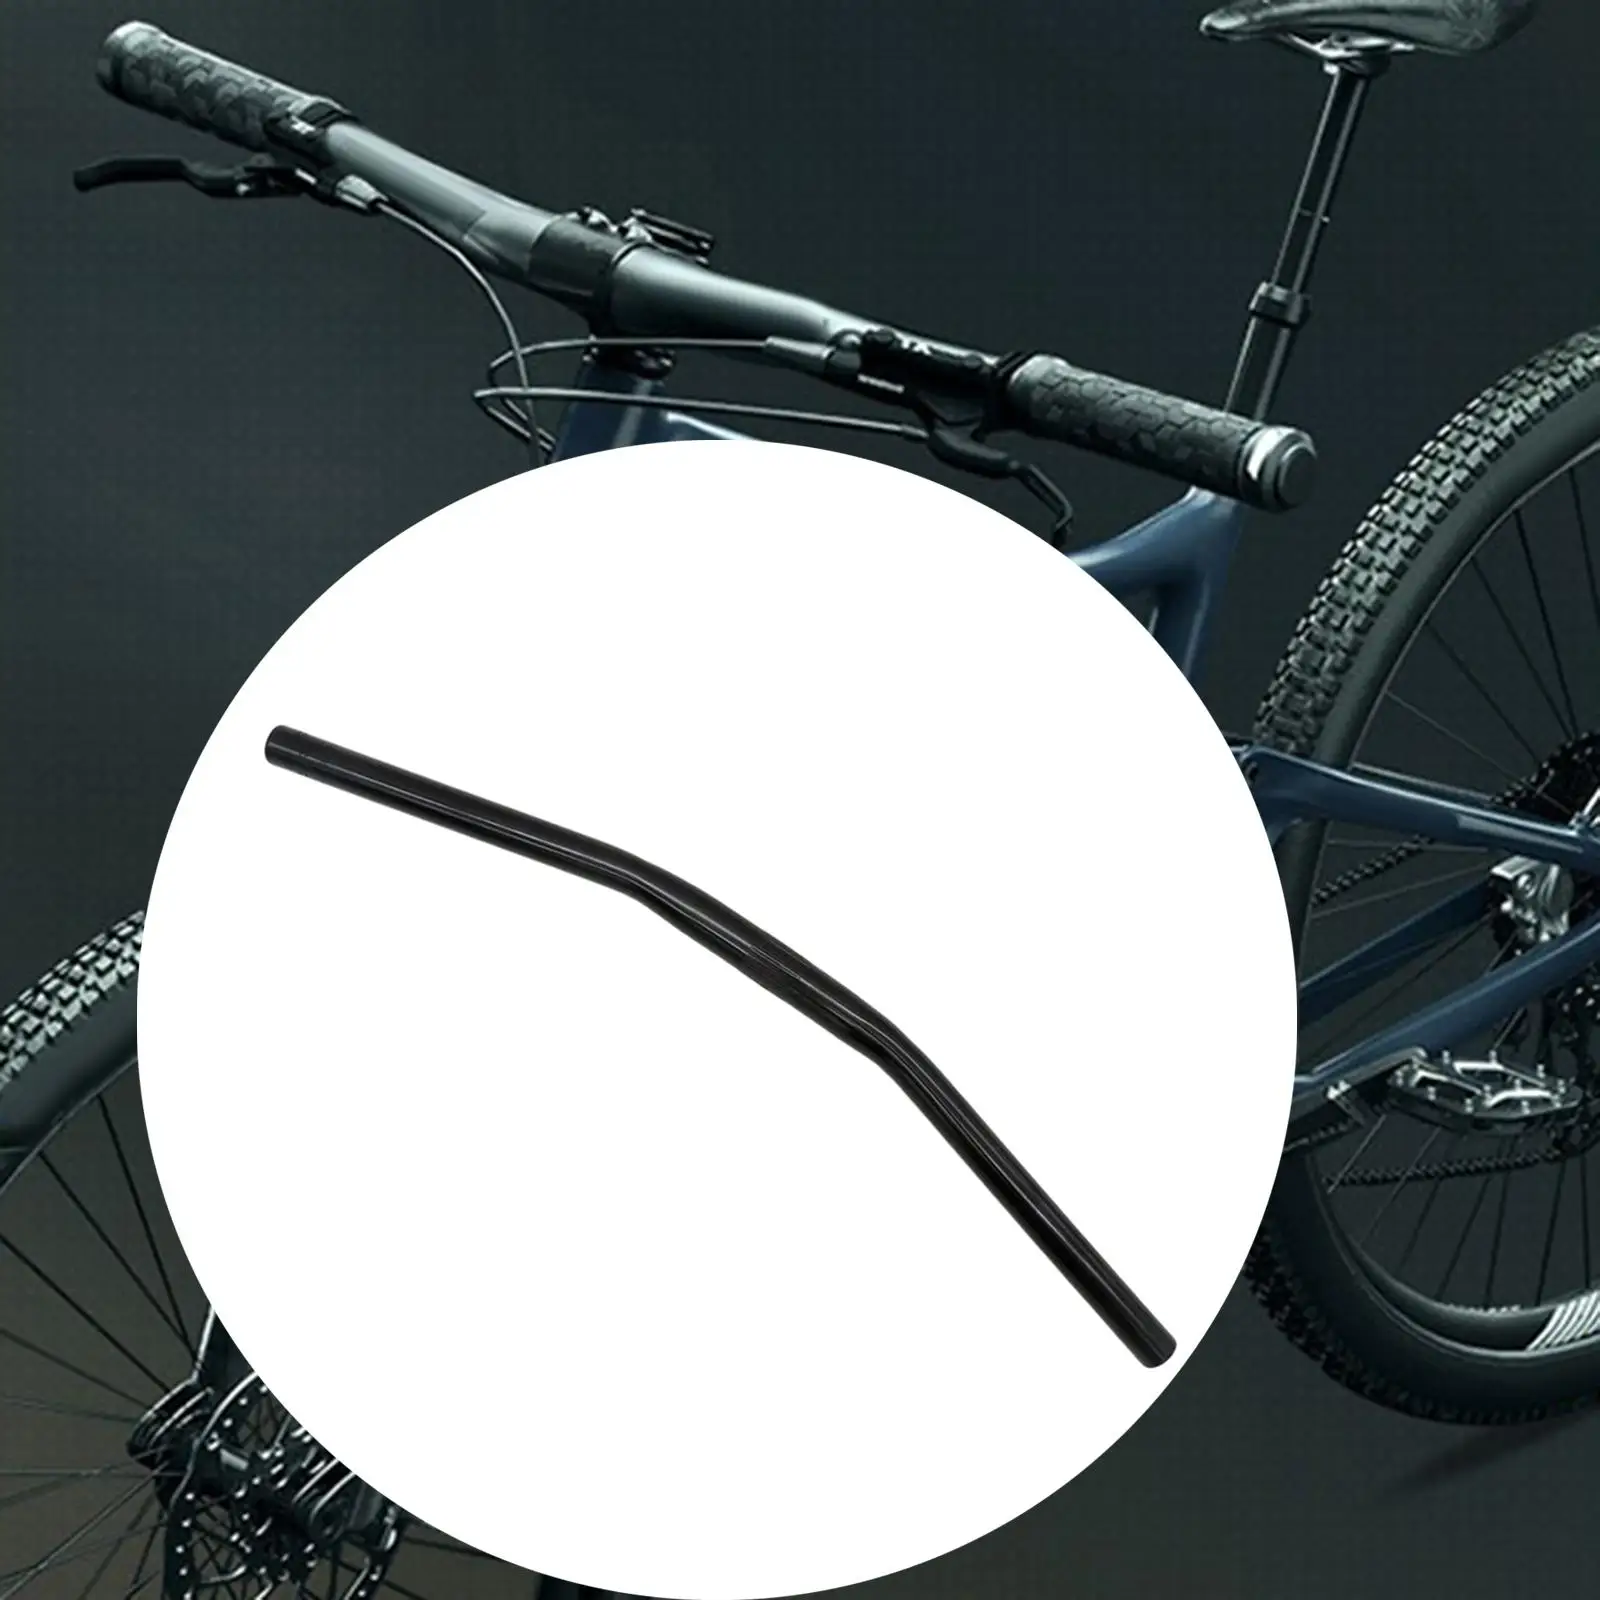 Mountain Bike Handlebar Black Bicycle Riser Bar for Accessories Parts Riding